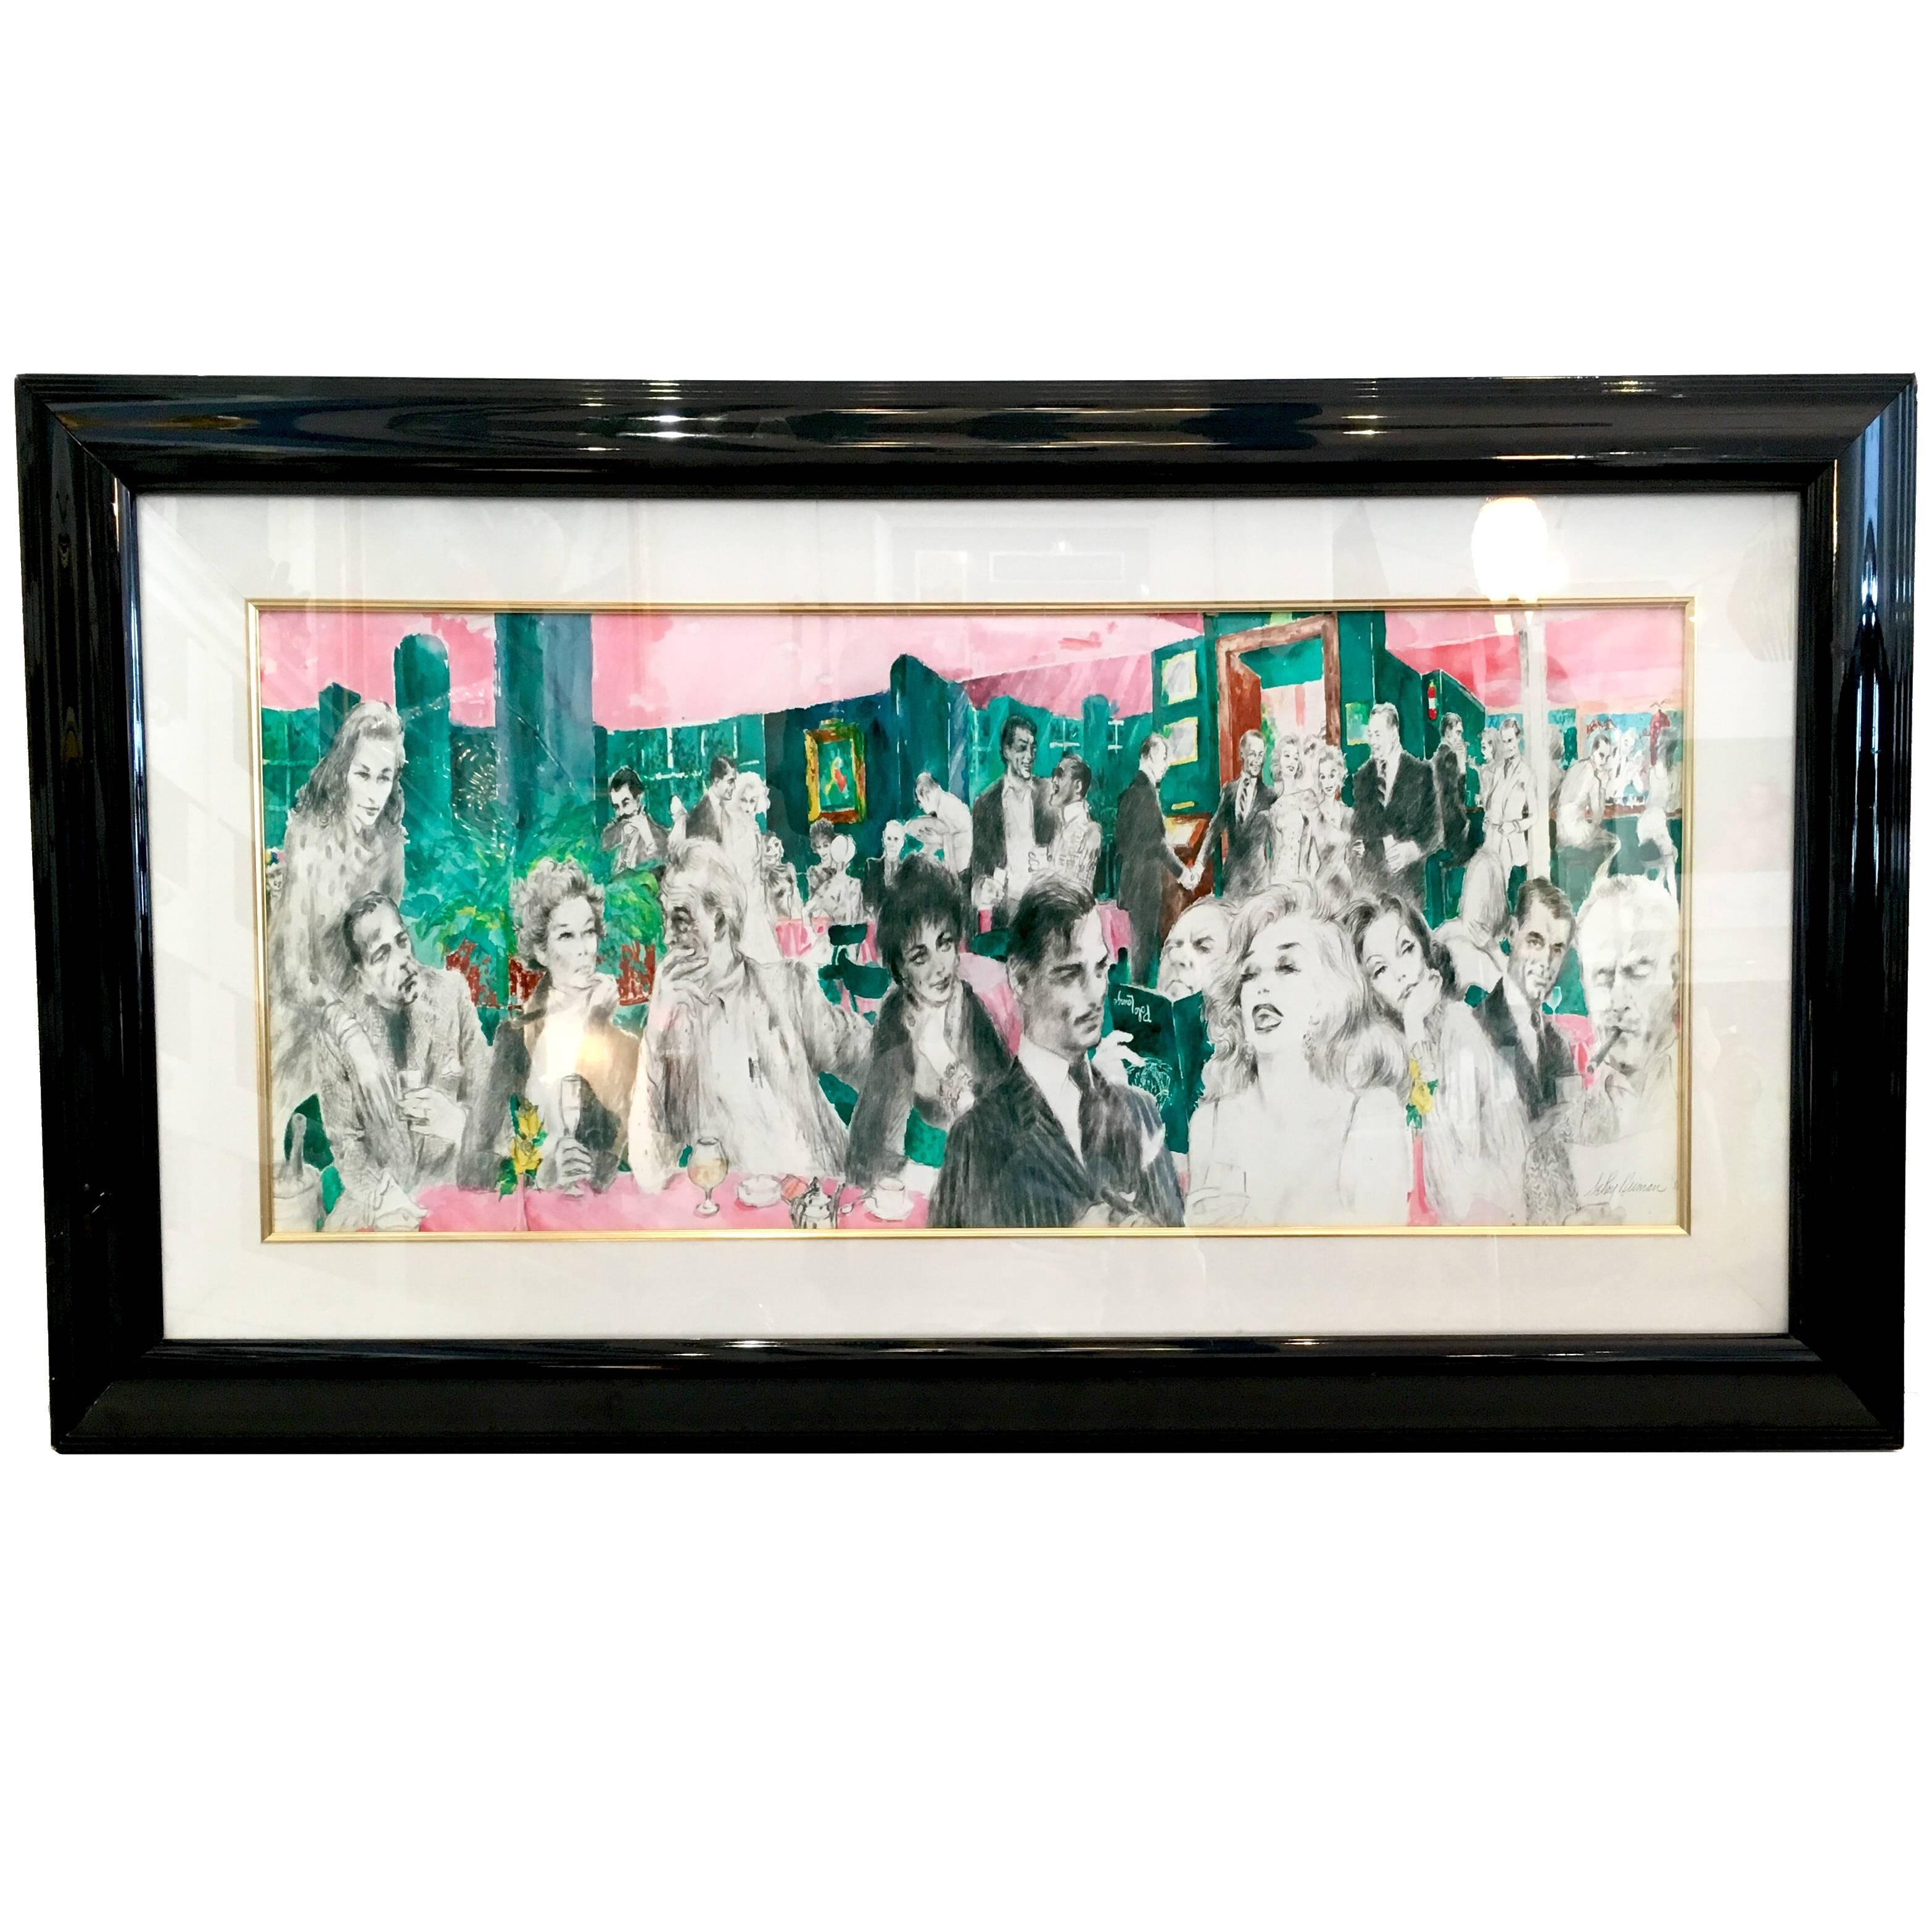 "Polo Lounge" by Leroy Neiman, 1988 Lithograph